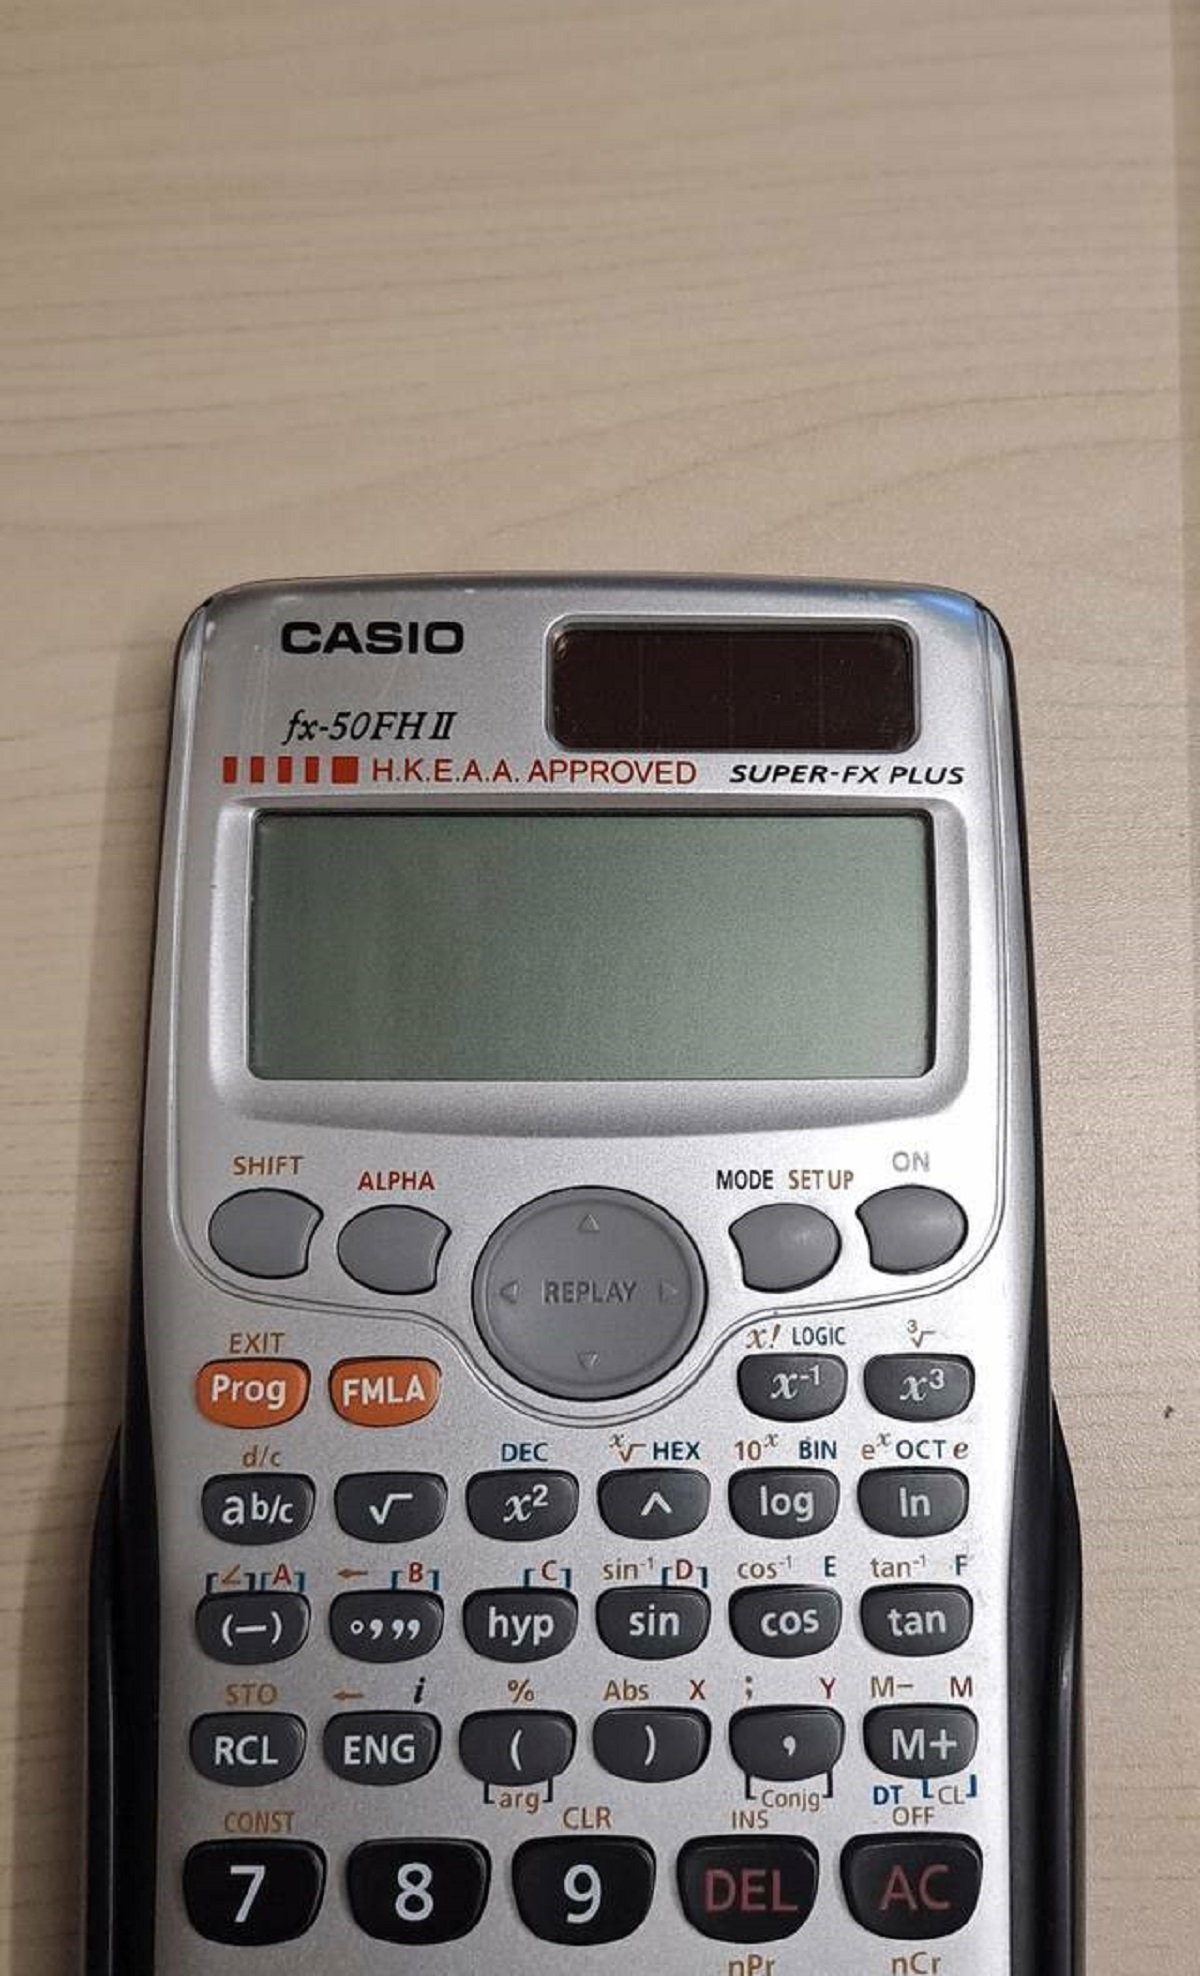 "In Hong Kong examinations, calculators are only allowed if they have this red little marking."